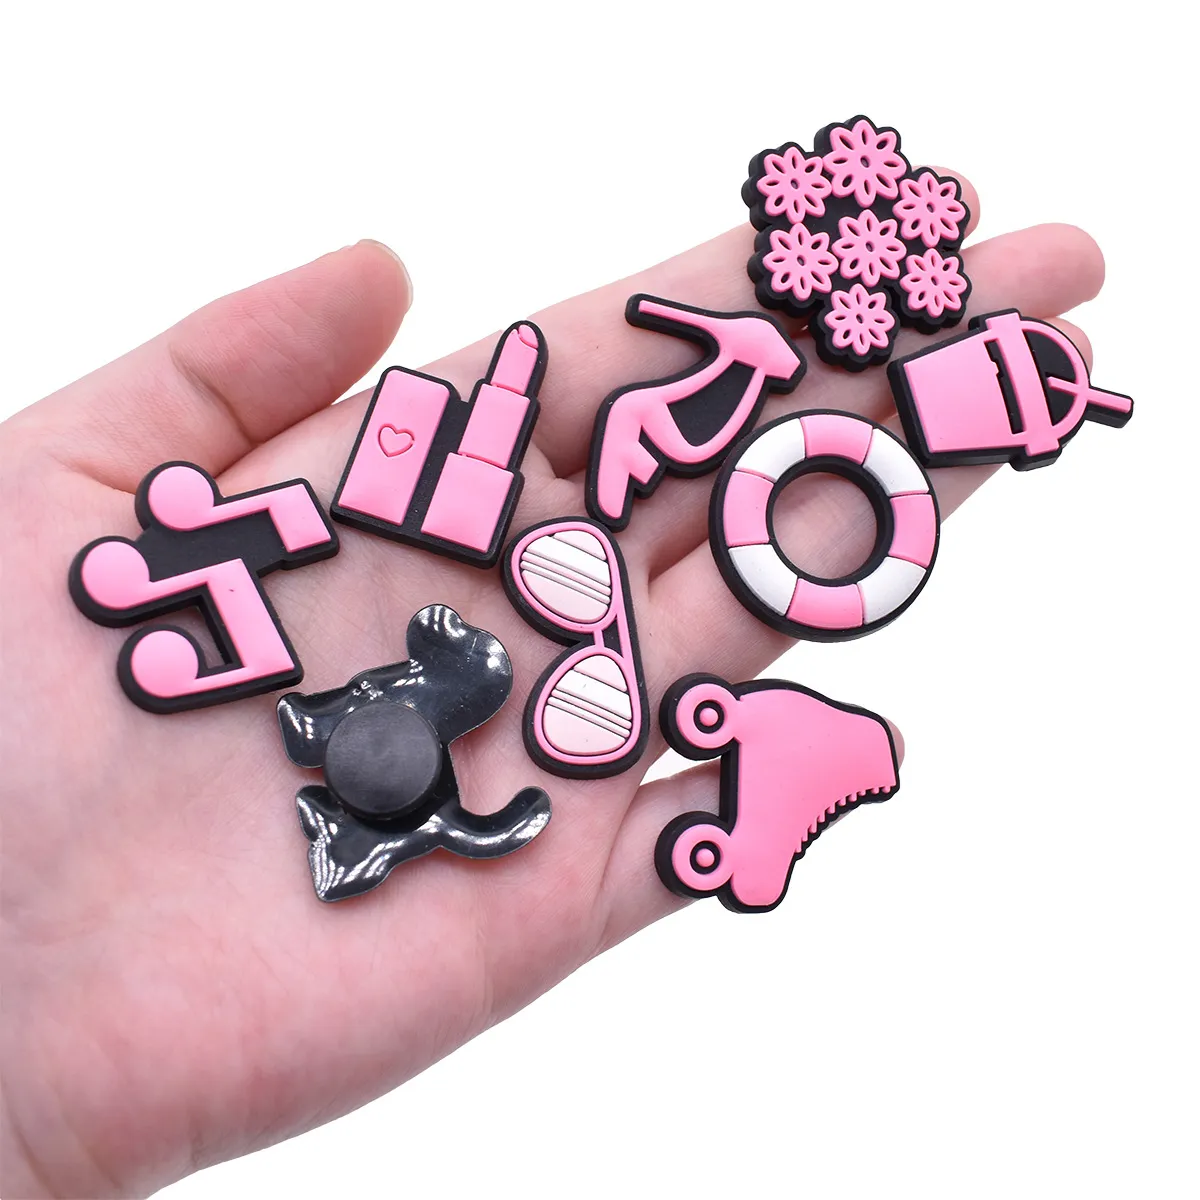 Shoe Parts Accessories Cute Charms Pvc Cartoon Decoration For Diy Clog Sandals Bracelets Kid Girls Boy Teen Party Favor Gift Series Oty1G